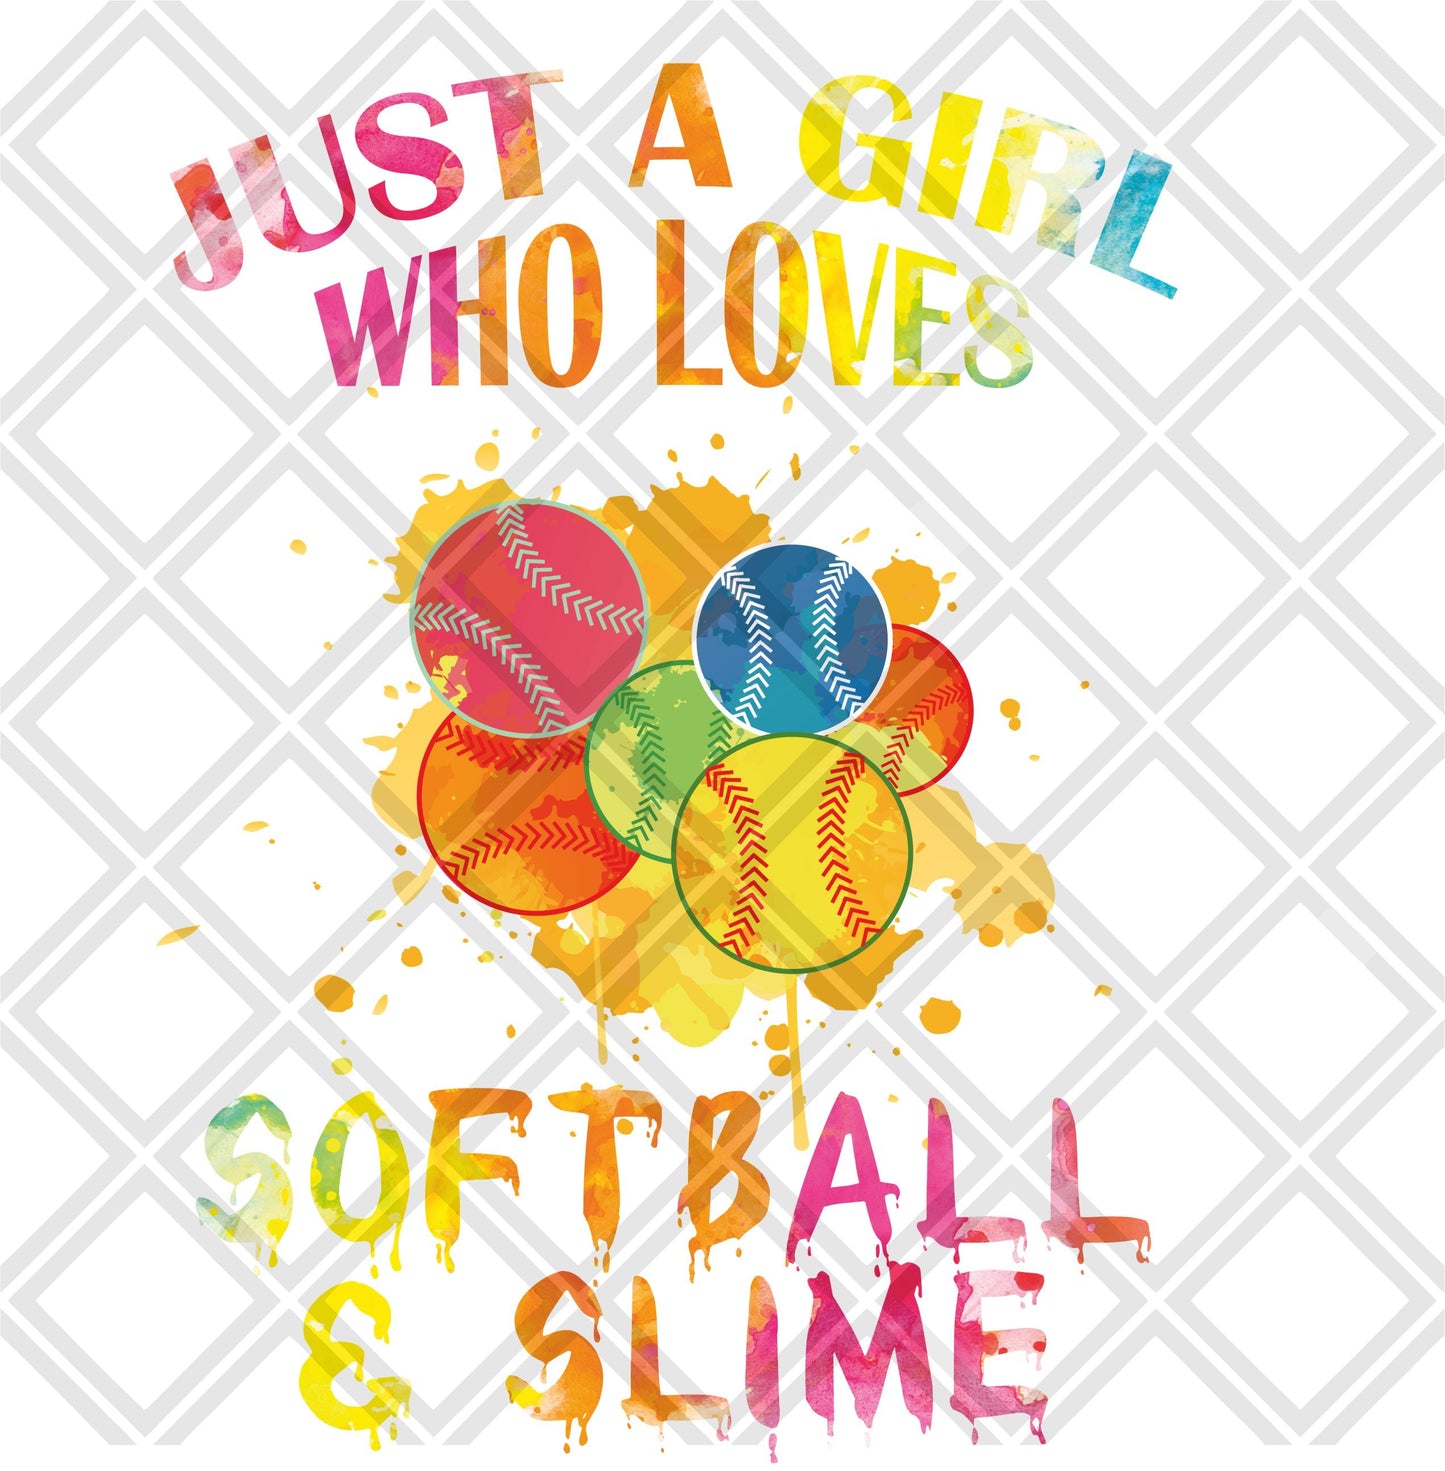 Just a girl who loves softball and slime frame Digital Download Instand Download